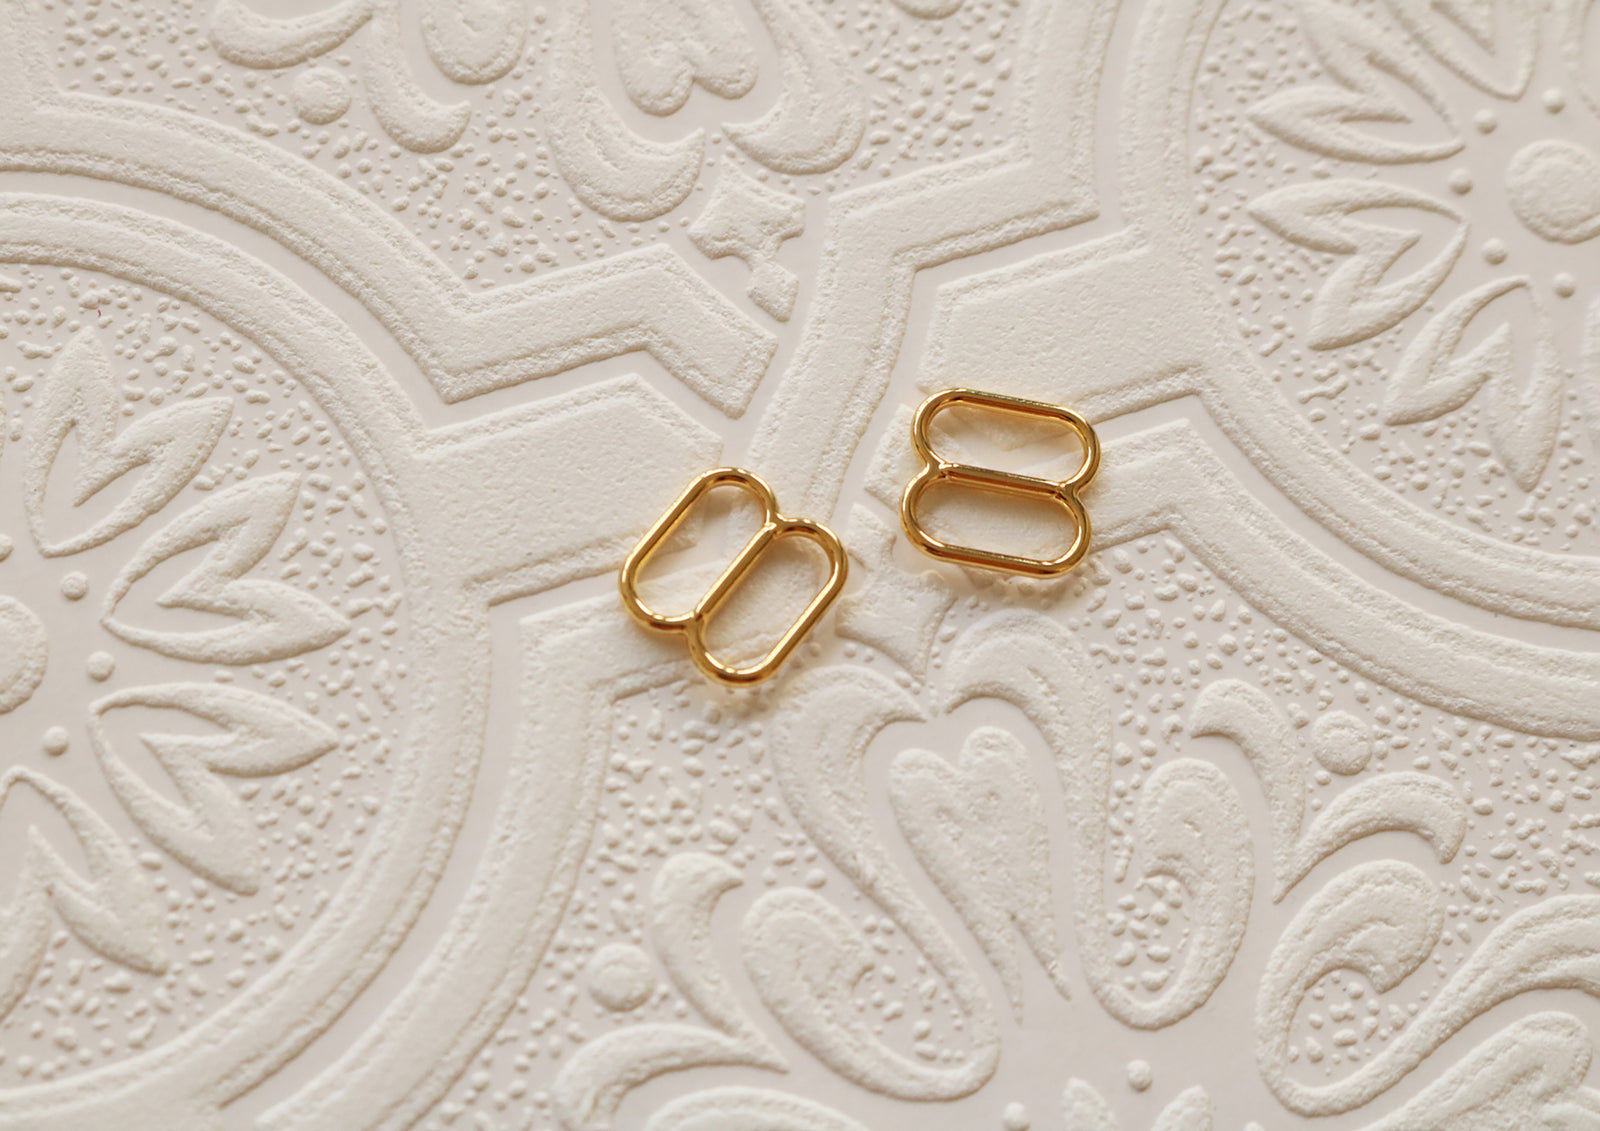 22K Gold-Plated Extra-Wide Sliders for Bra Making, 1/2"